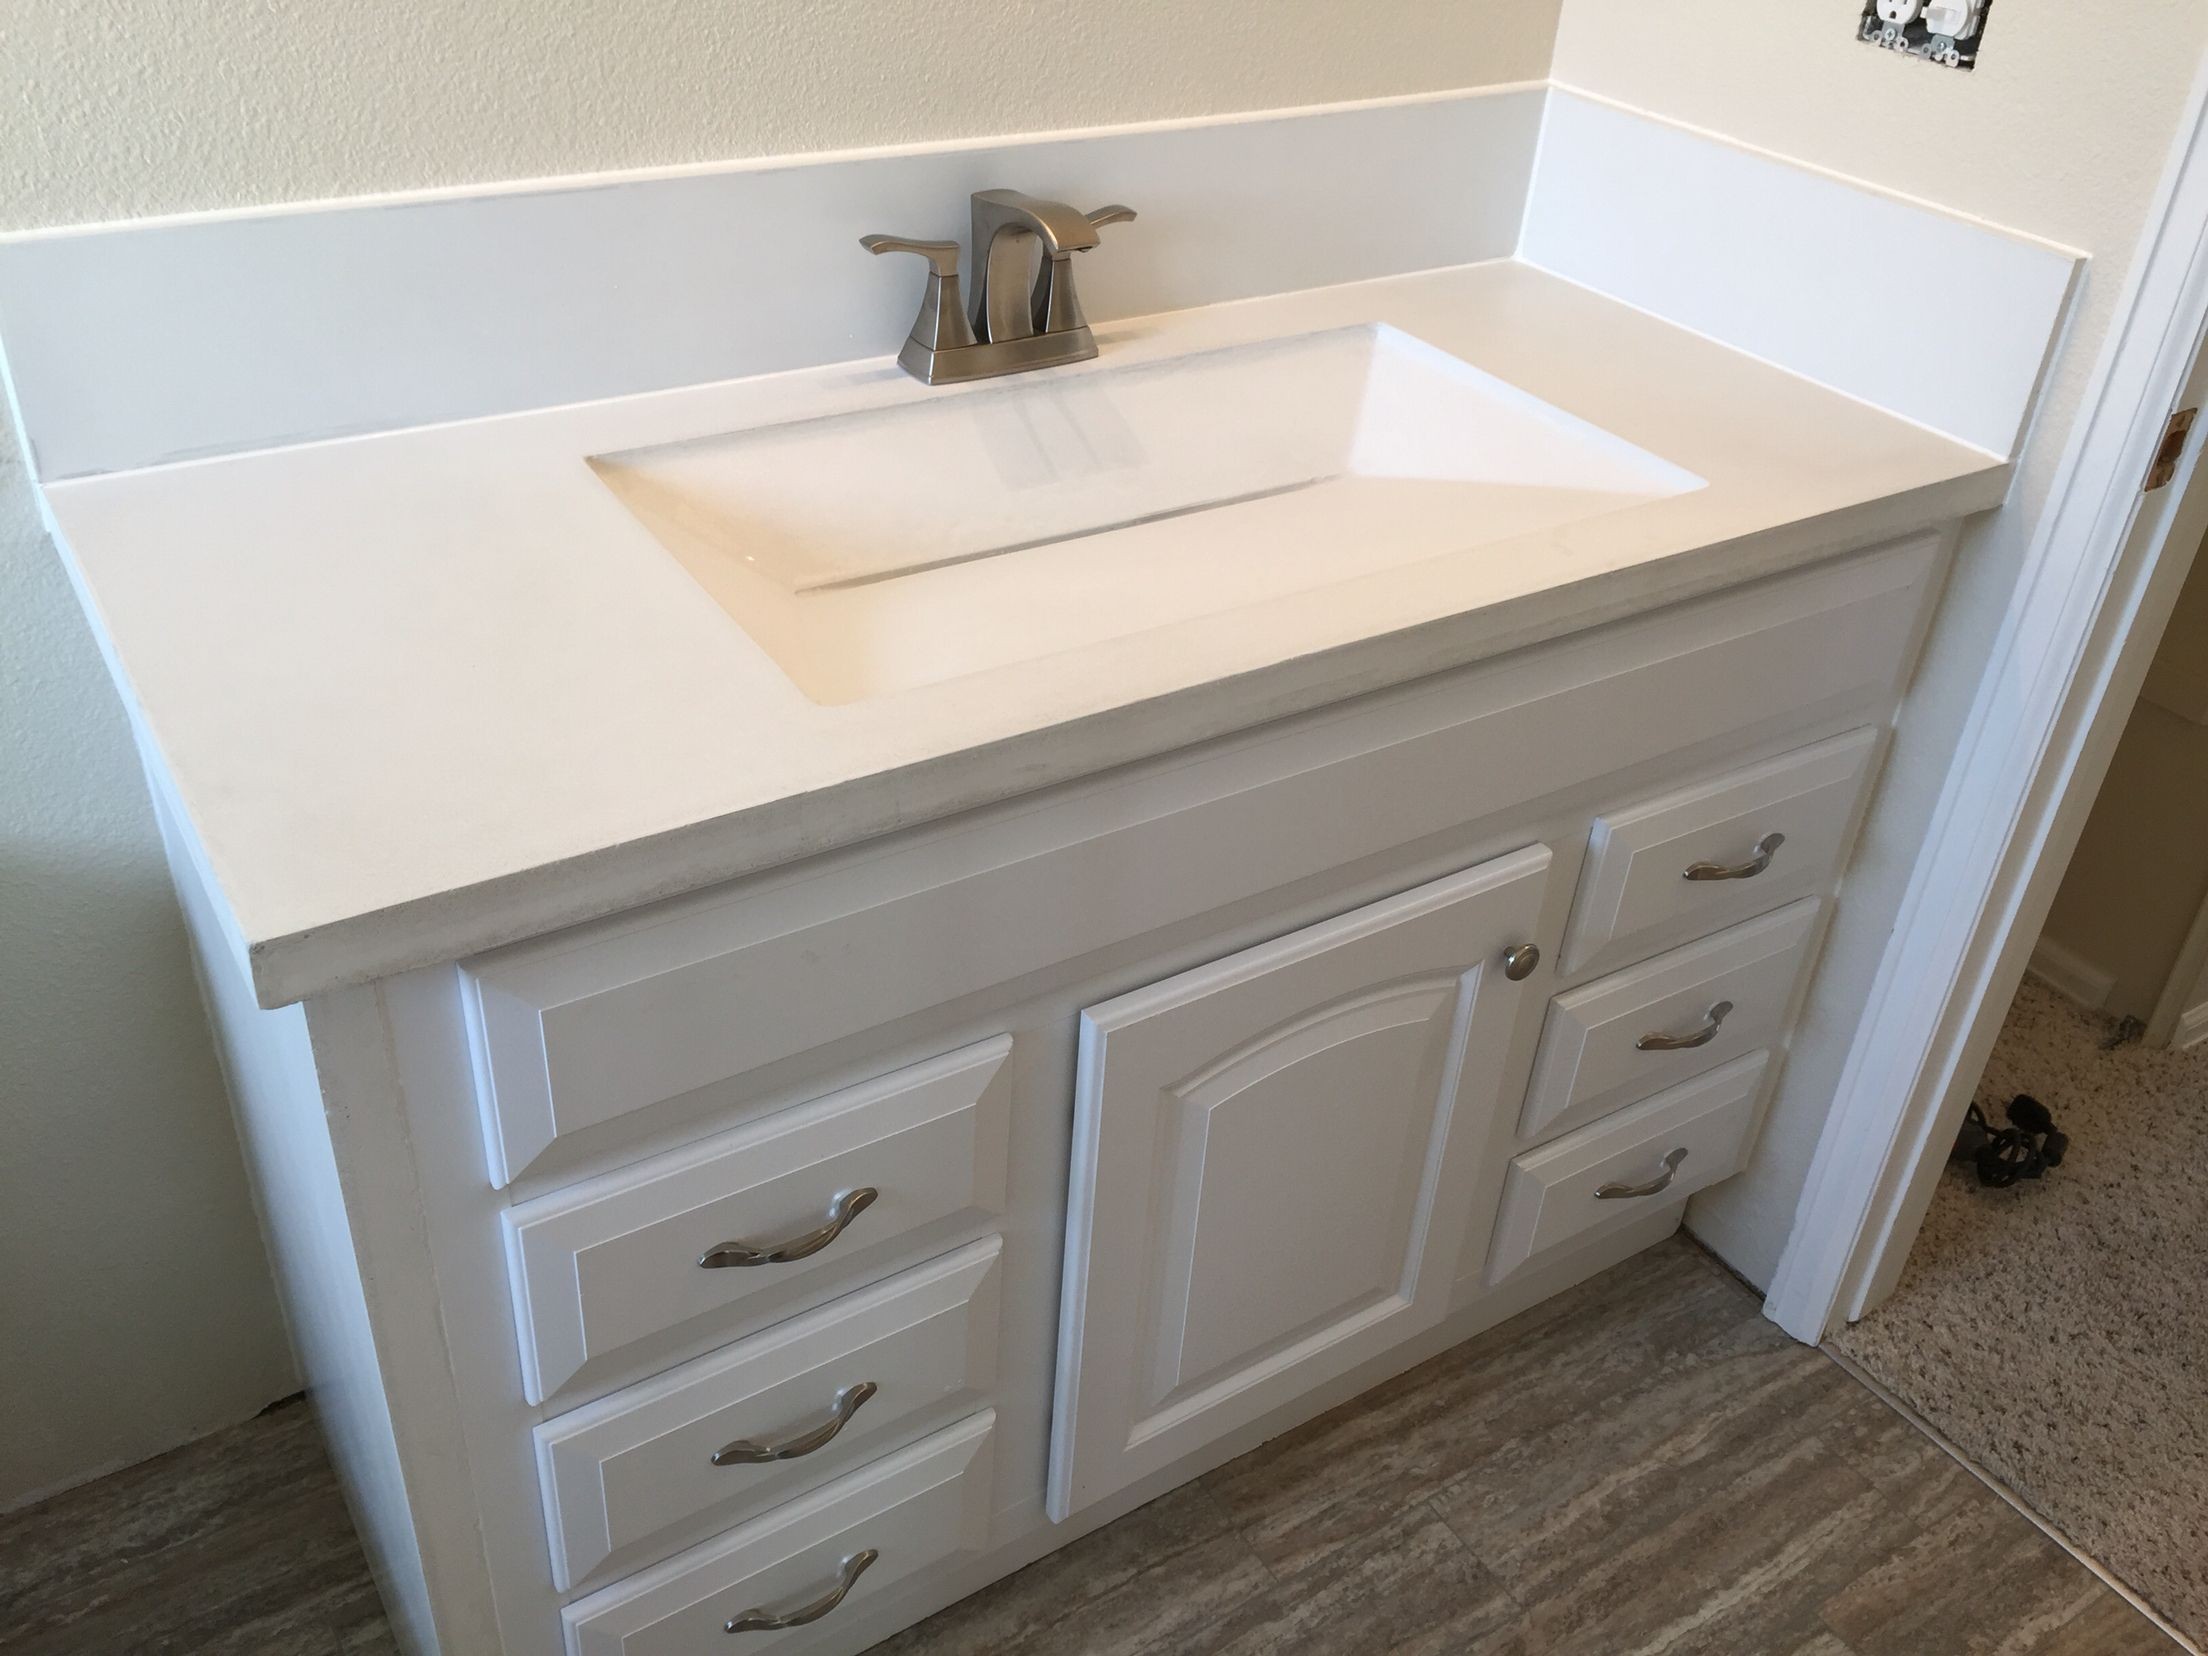 white bathroom sink cabinet doors and white handles